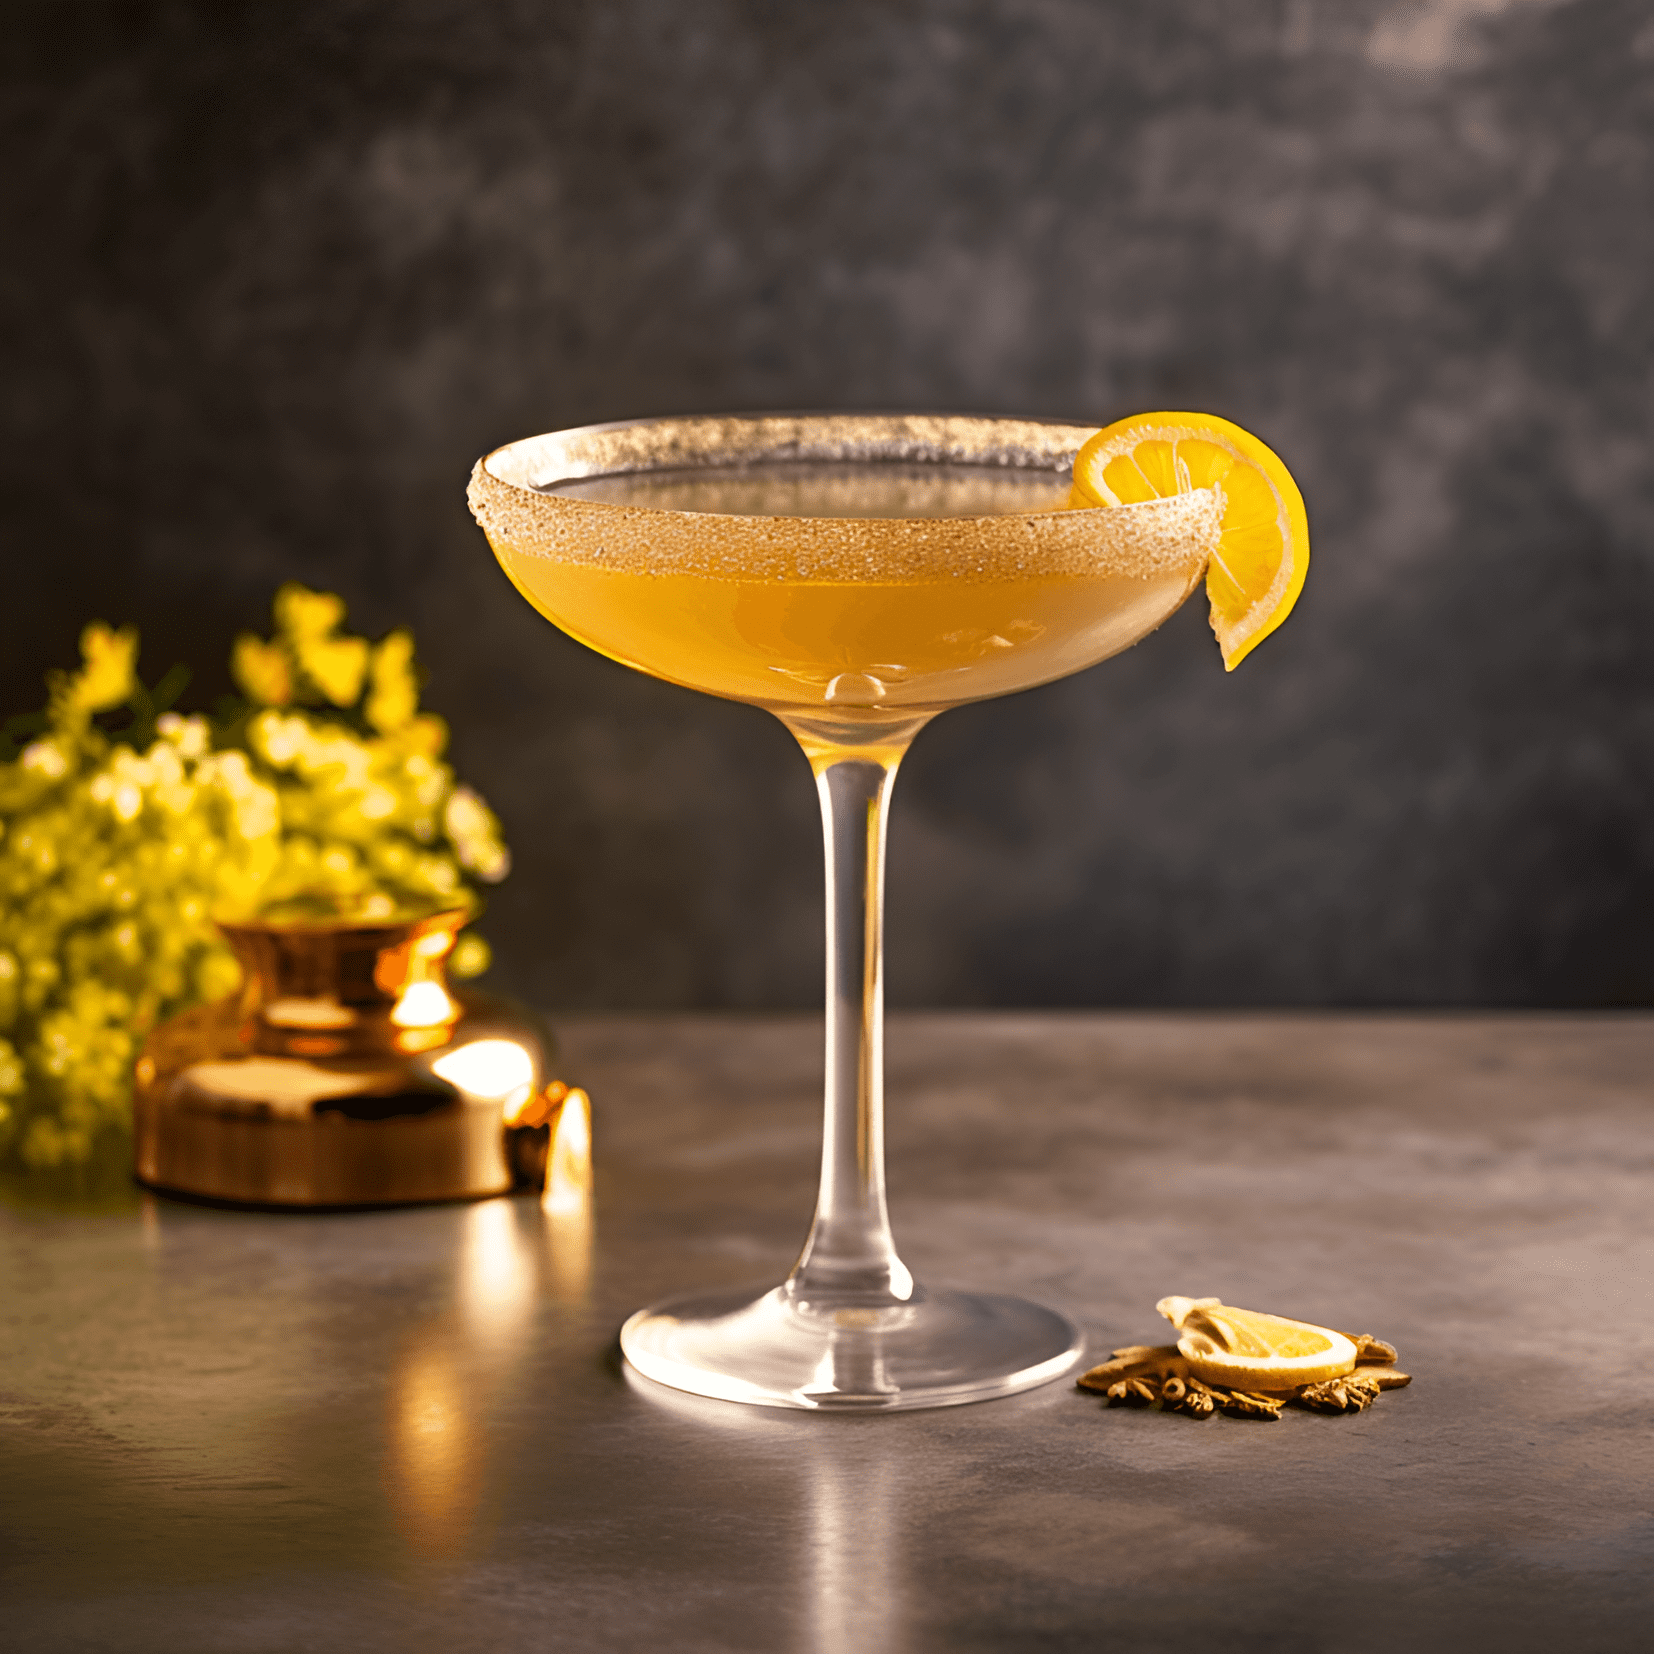 Brandy Daisy Cocktail Recipe - The Brandy Daisy is a well-balanced cocktail with a delightful combination of sweet, sour, and strong flavors. The brandy provides a rich, warming base, while the lemon juice adds a refreshing tanginess. The sweetness from the simple syrup and orange liqueur rounds out the flavors, creating a smooth and satisfying drink.